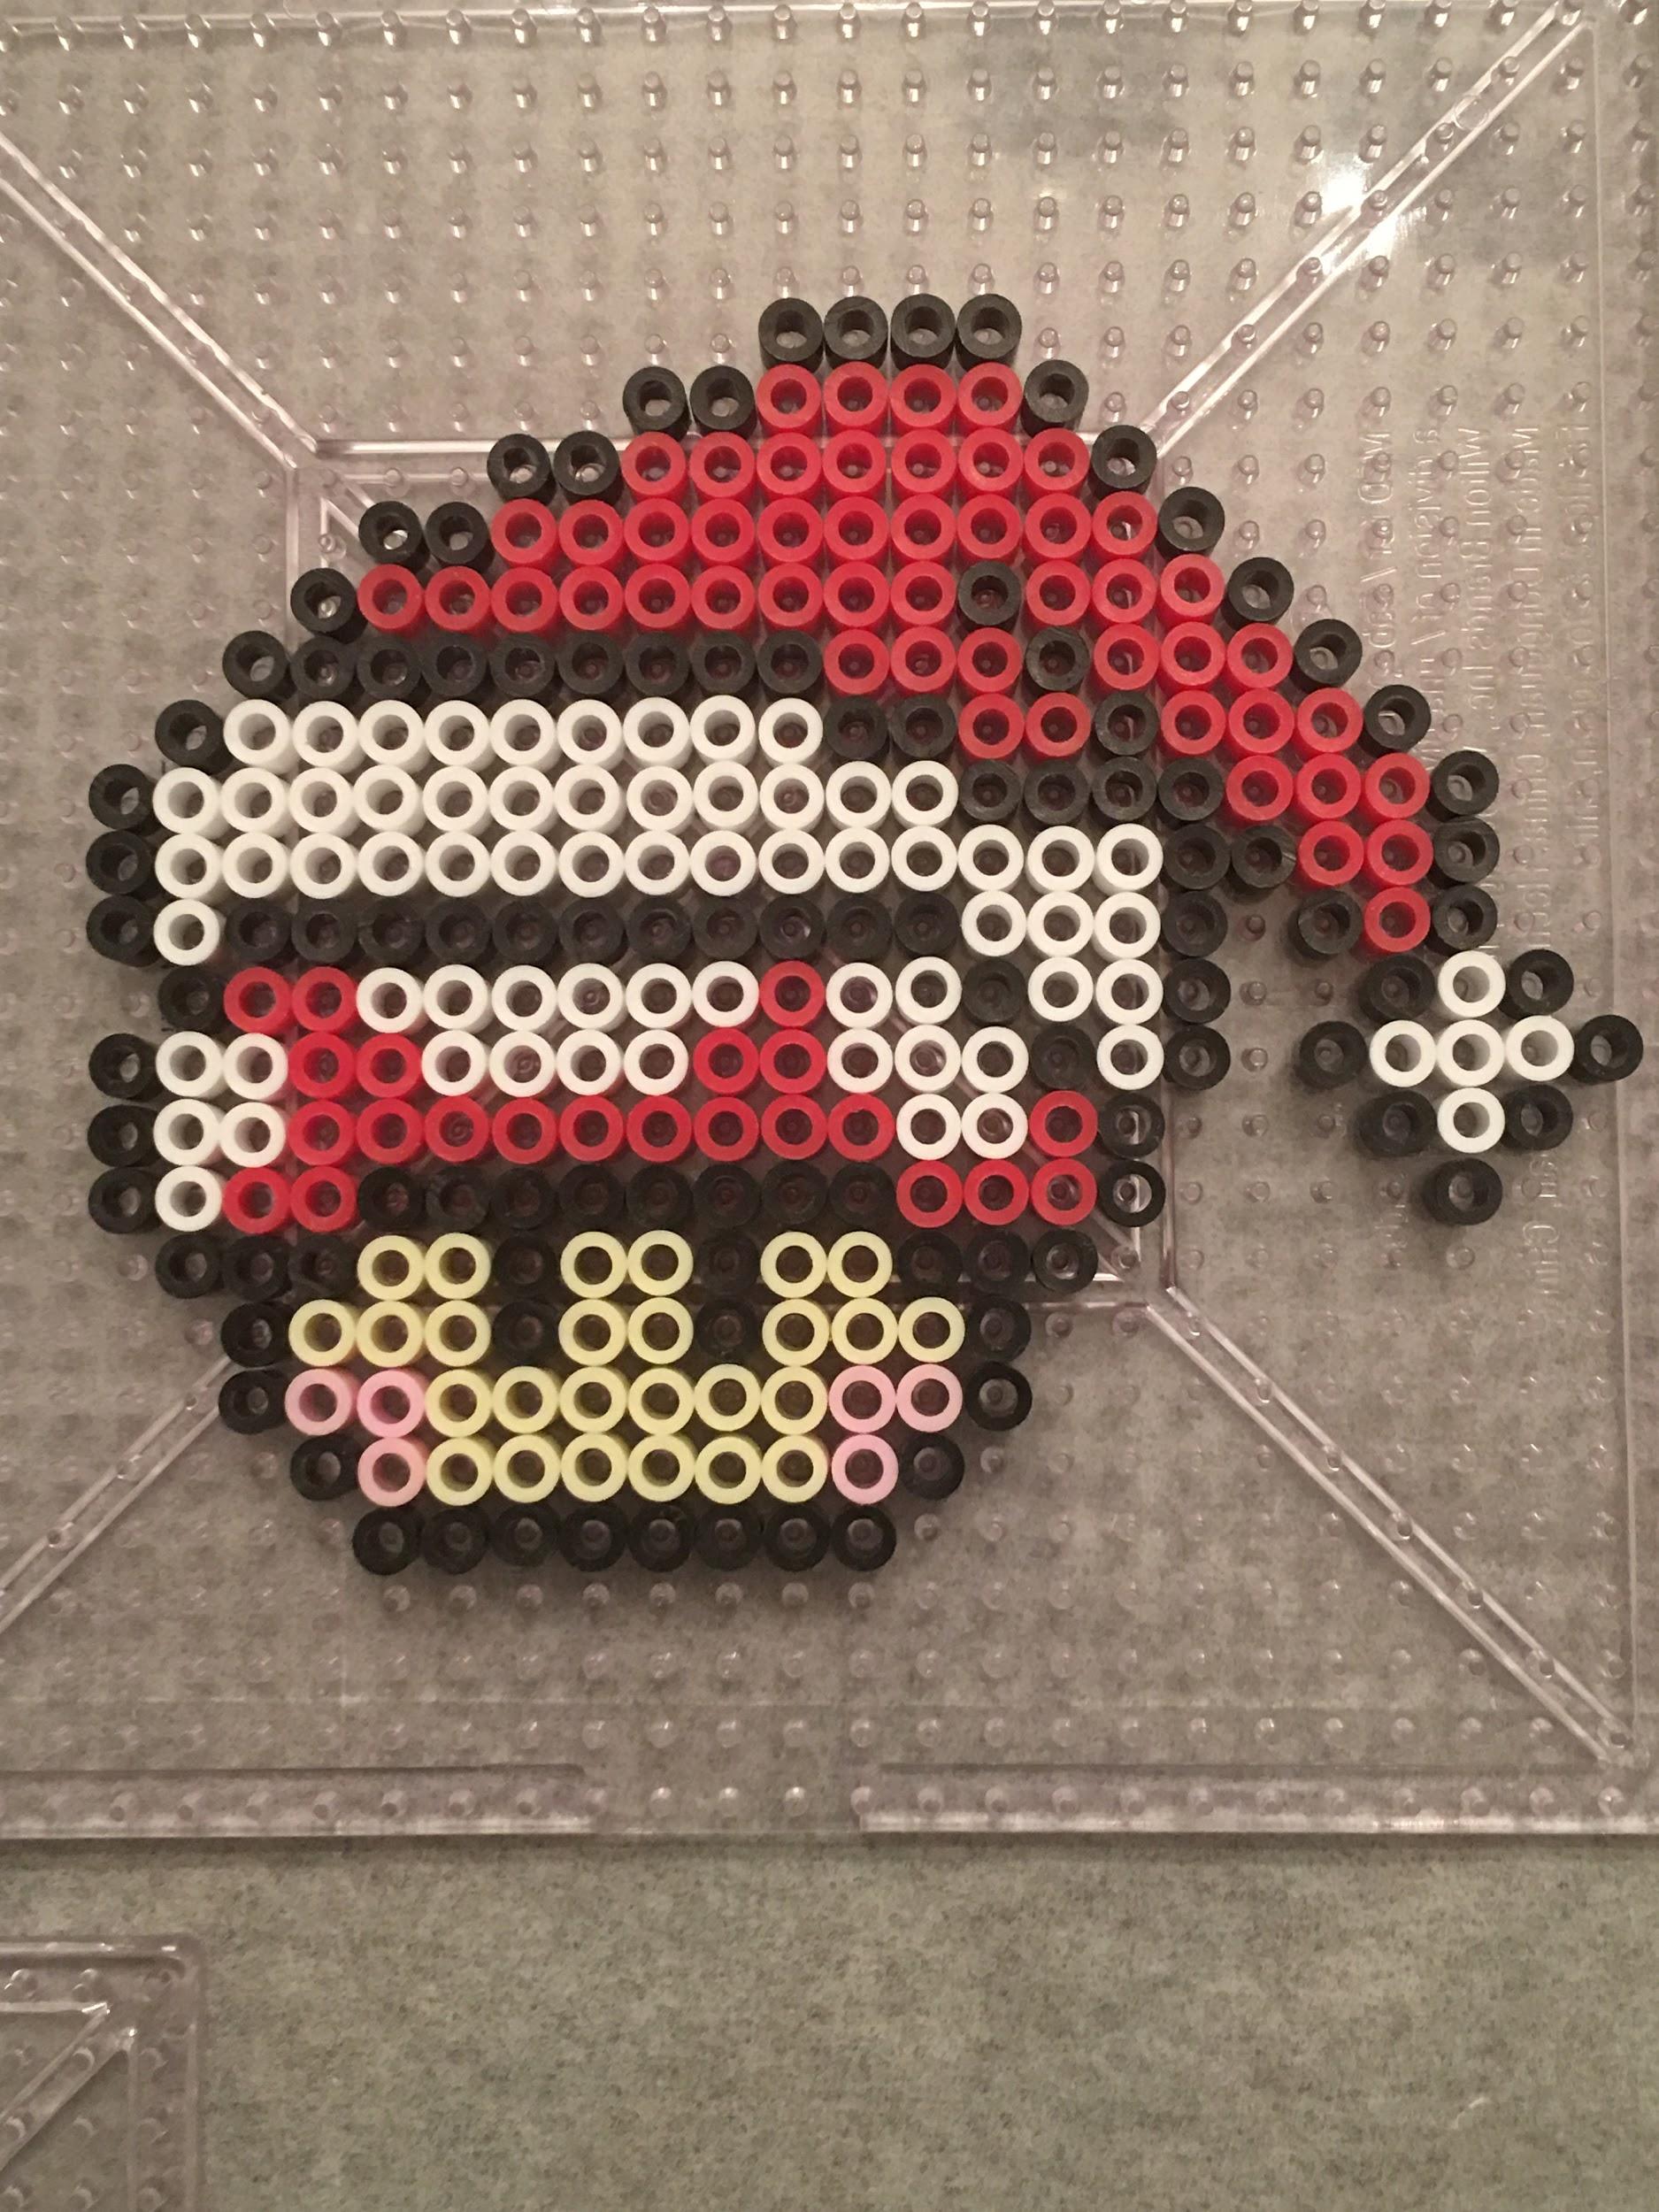 Mario Themed Perler Bead Patterns – For Parents,Teachers, Scout Leaders &  Really Just Everyone!